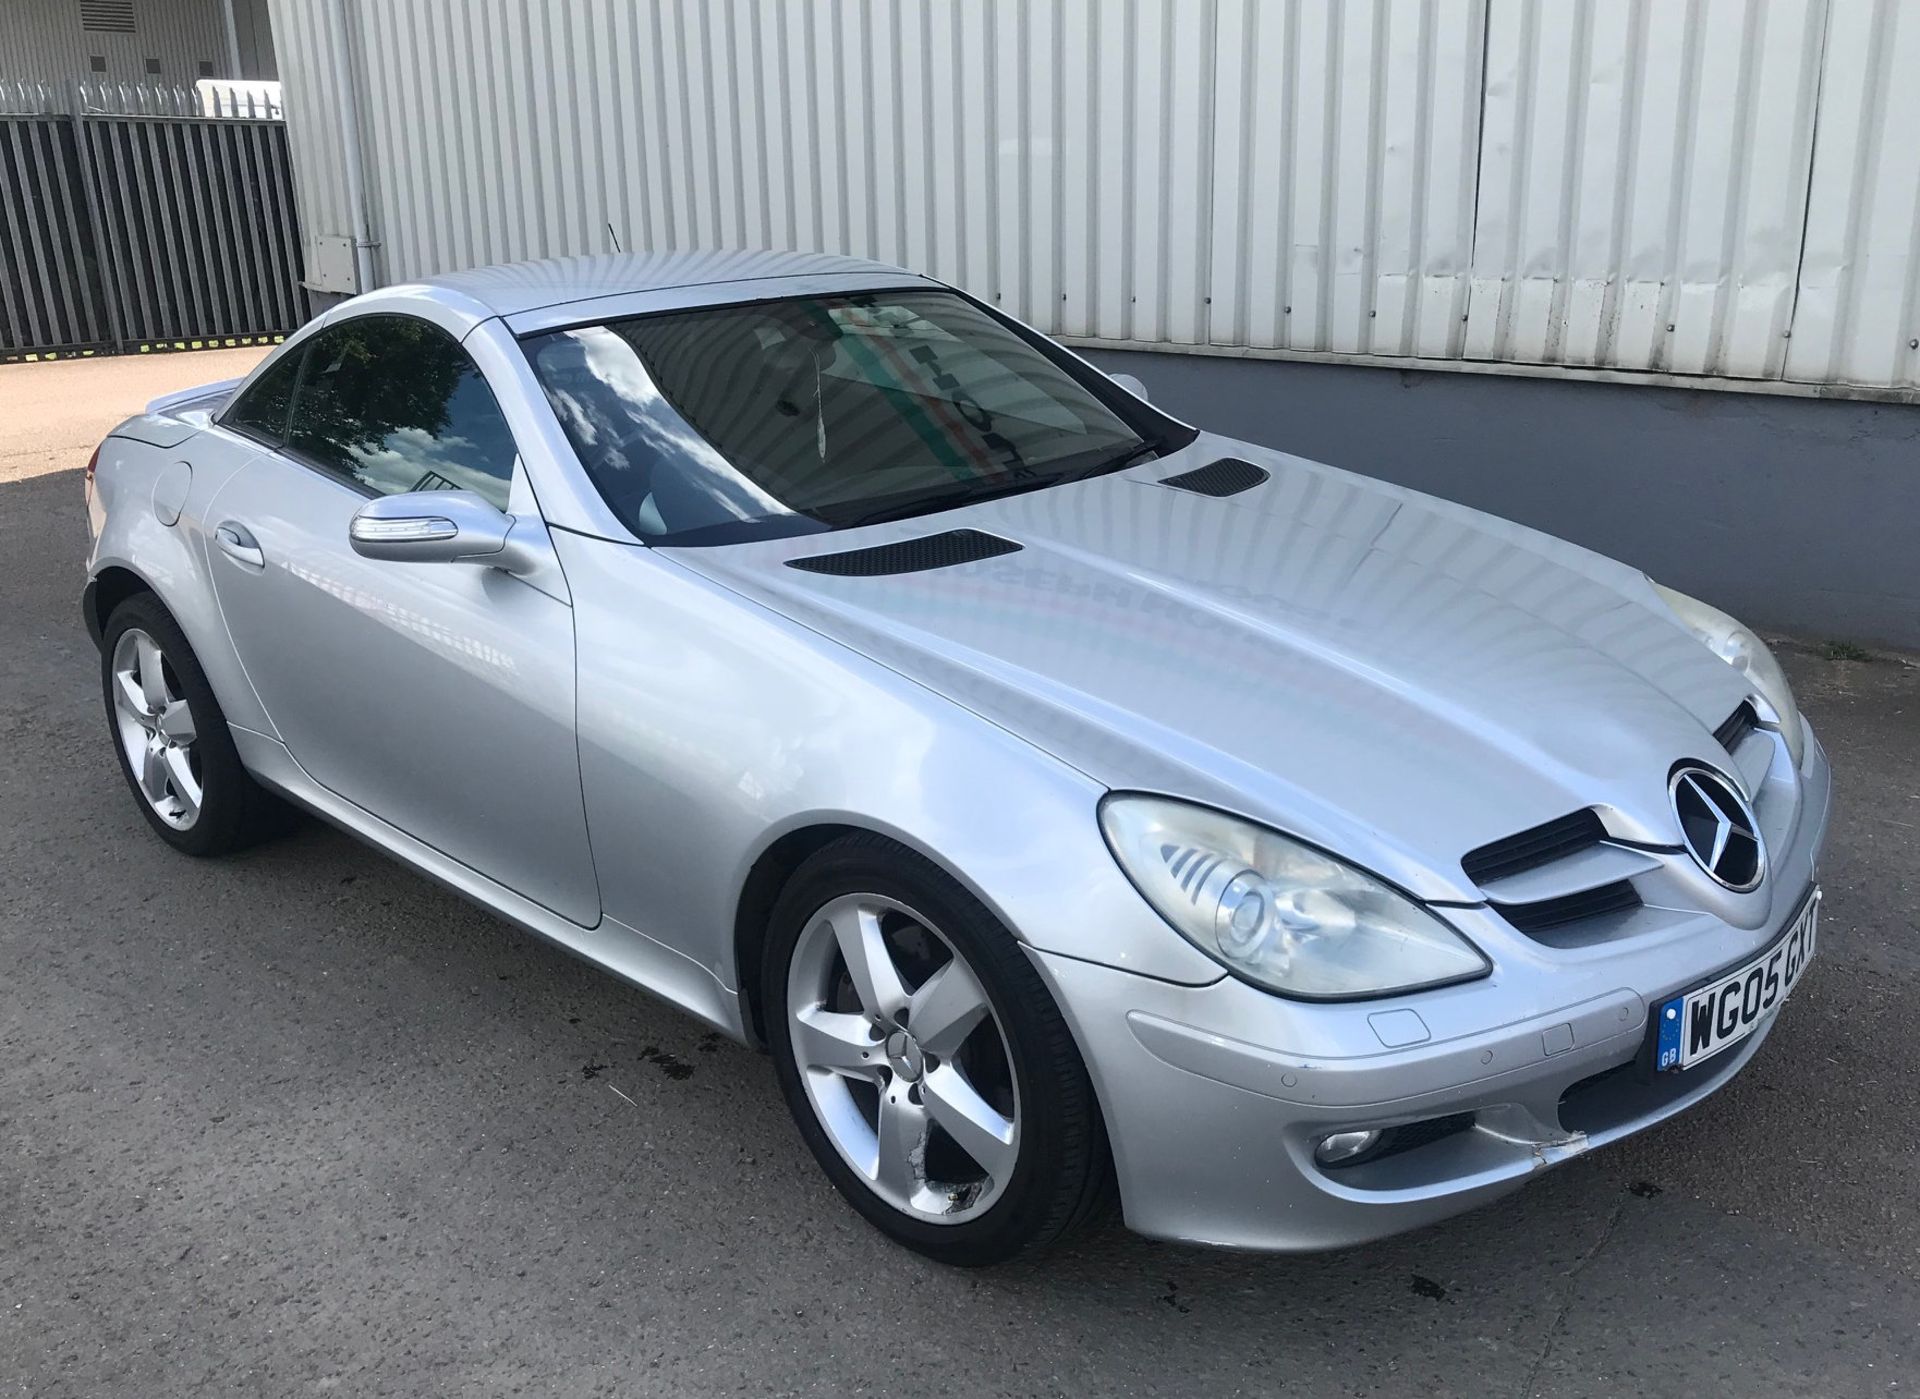 2005 Mercedes SLK 350 2 Dr Convertible - CL505 - NO VAT ON THE HAMMER - Location: Corby, N